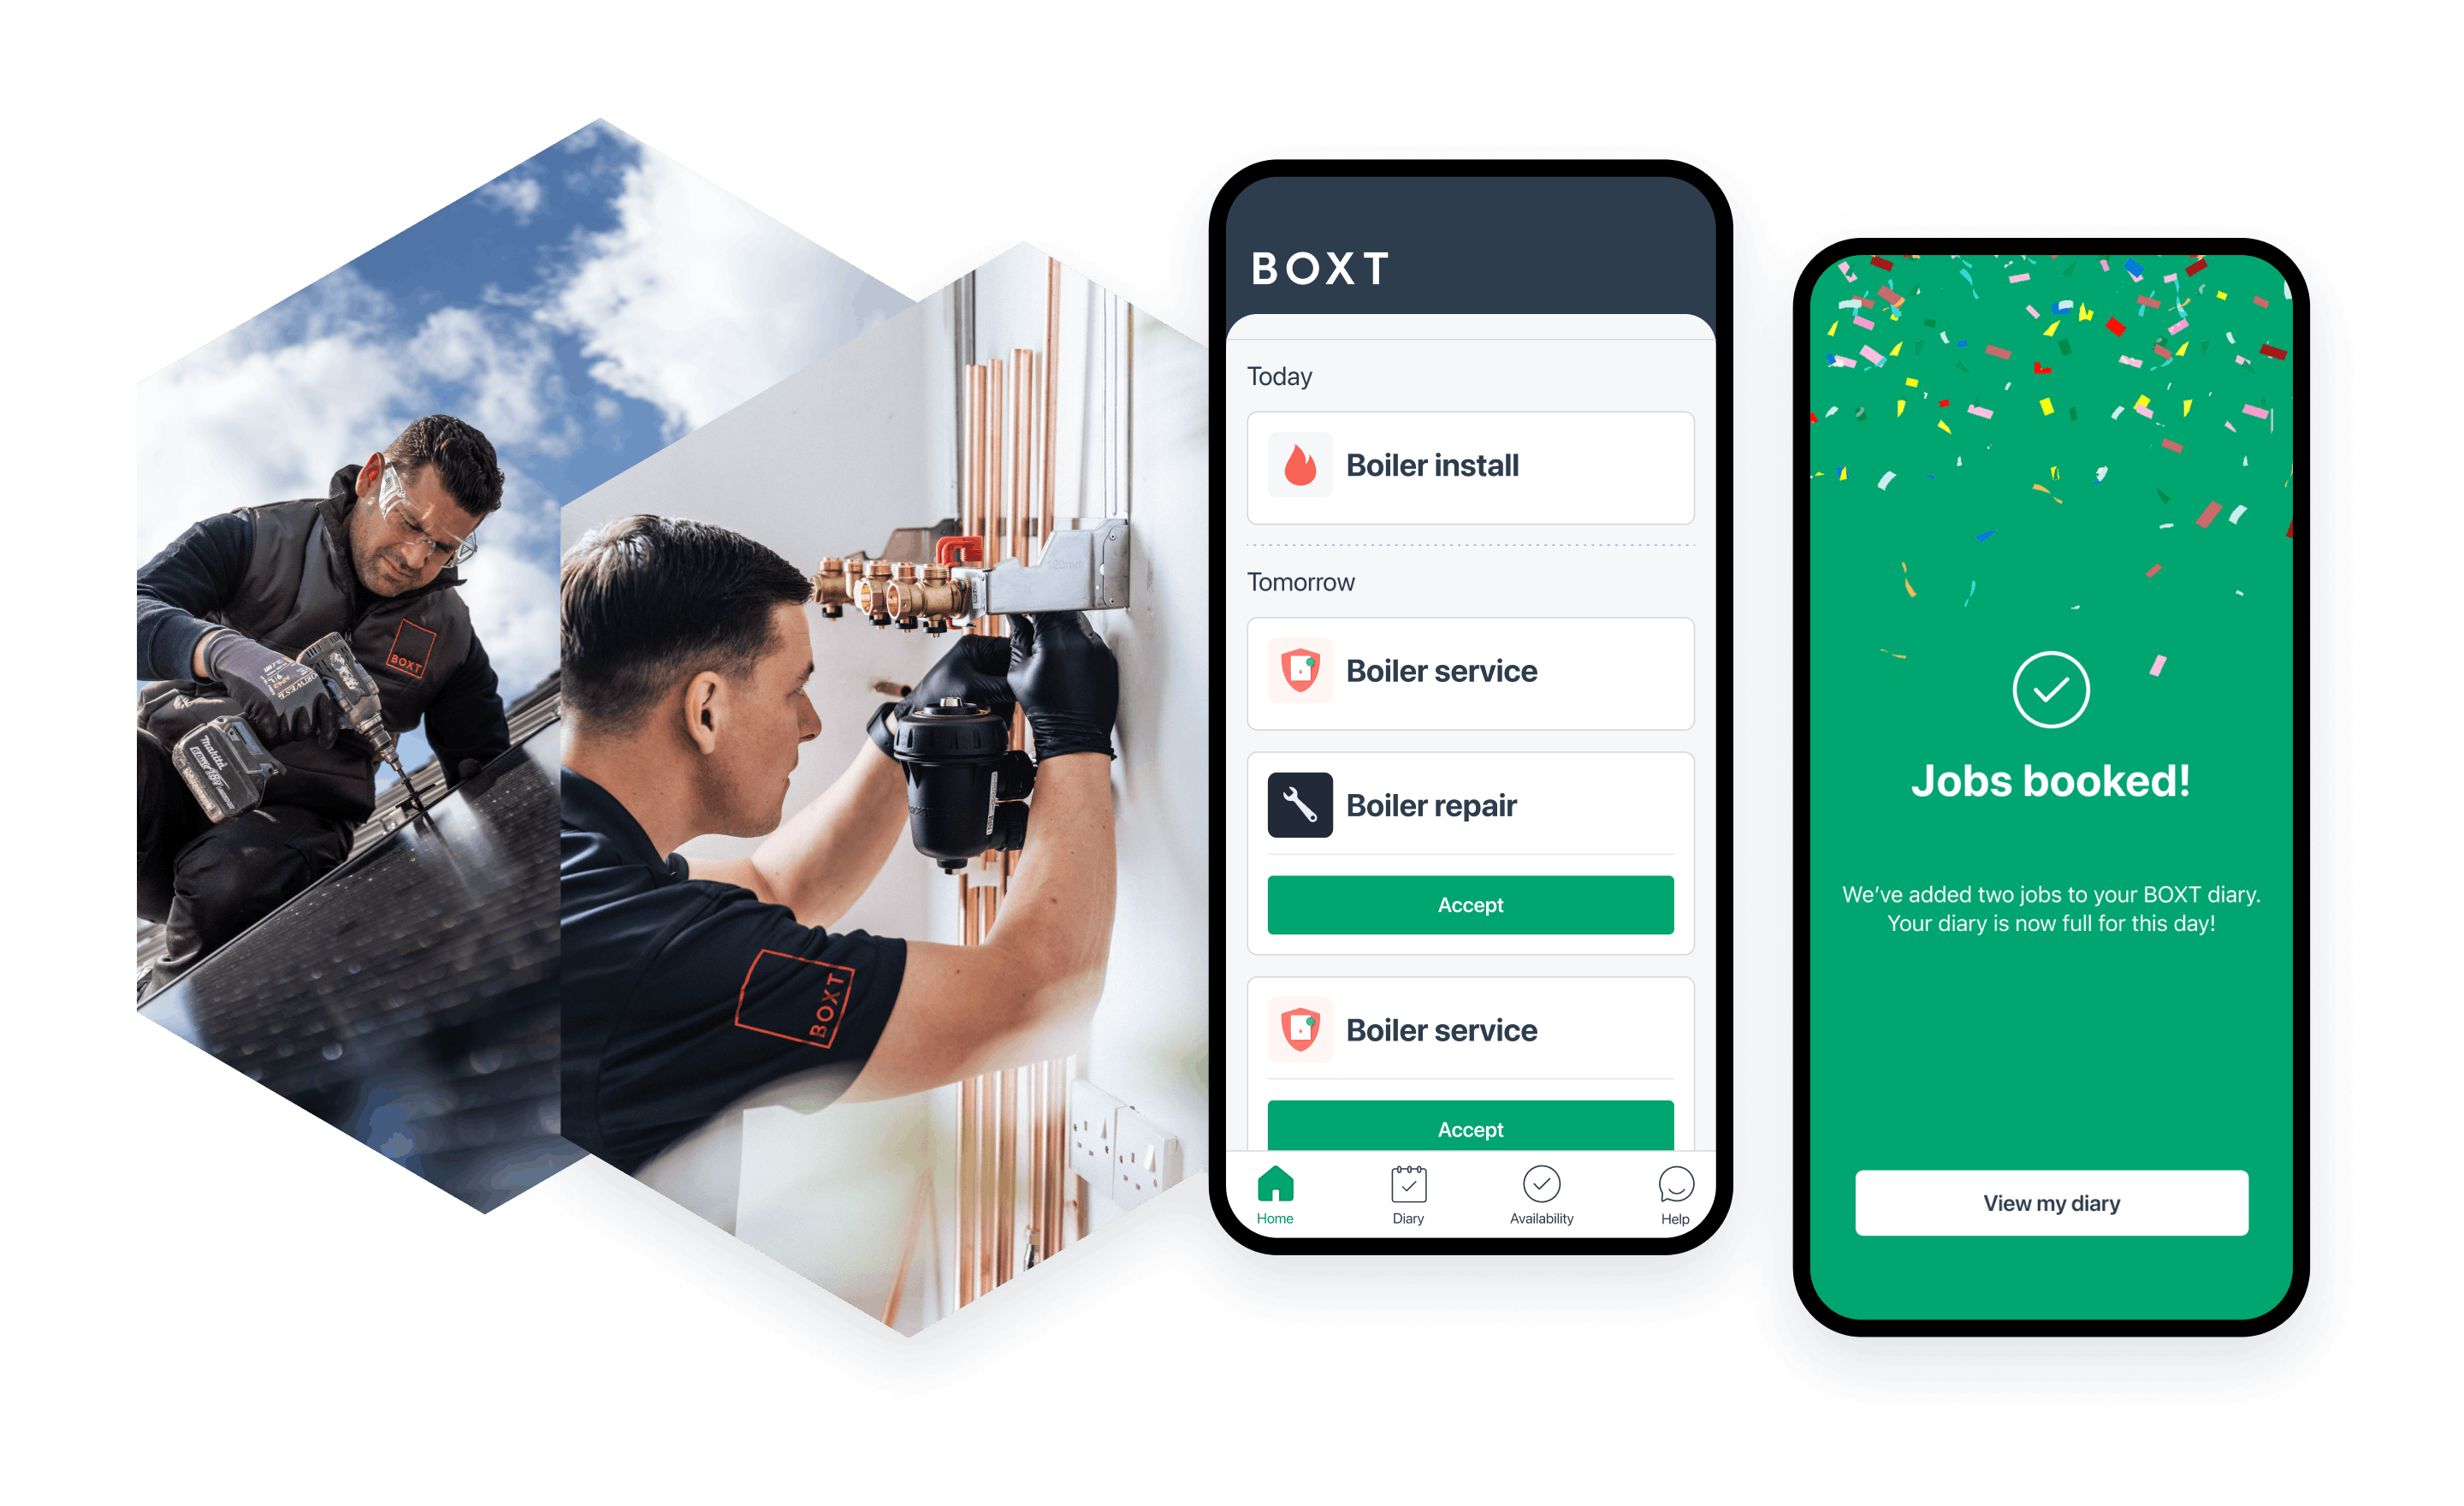 A collage image, there are two images of BOXT engineers, one is installing a solar panel, the other is installing heating pipes. Then there are some screens of the BOXT Engineer app 